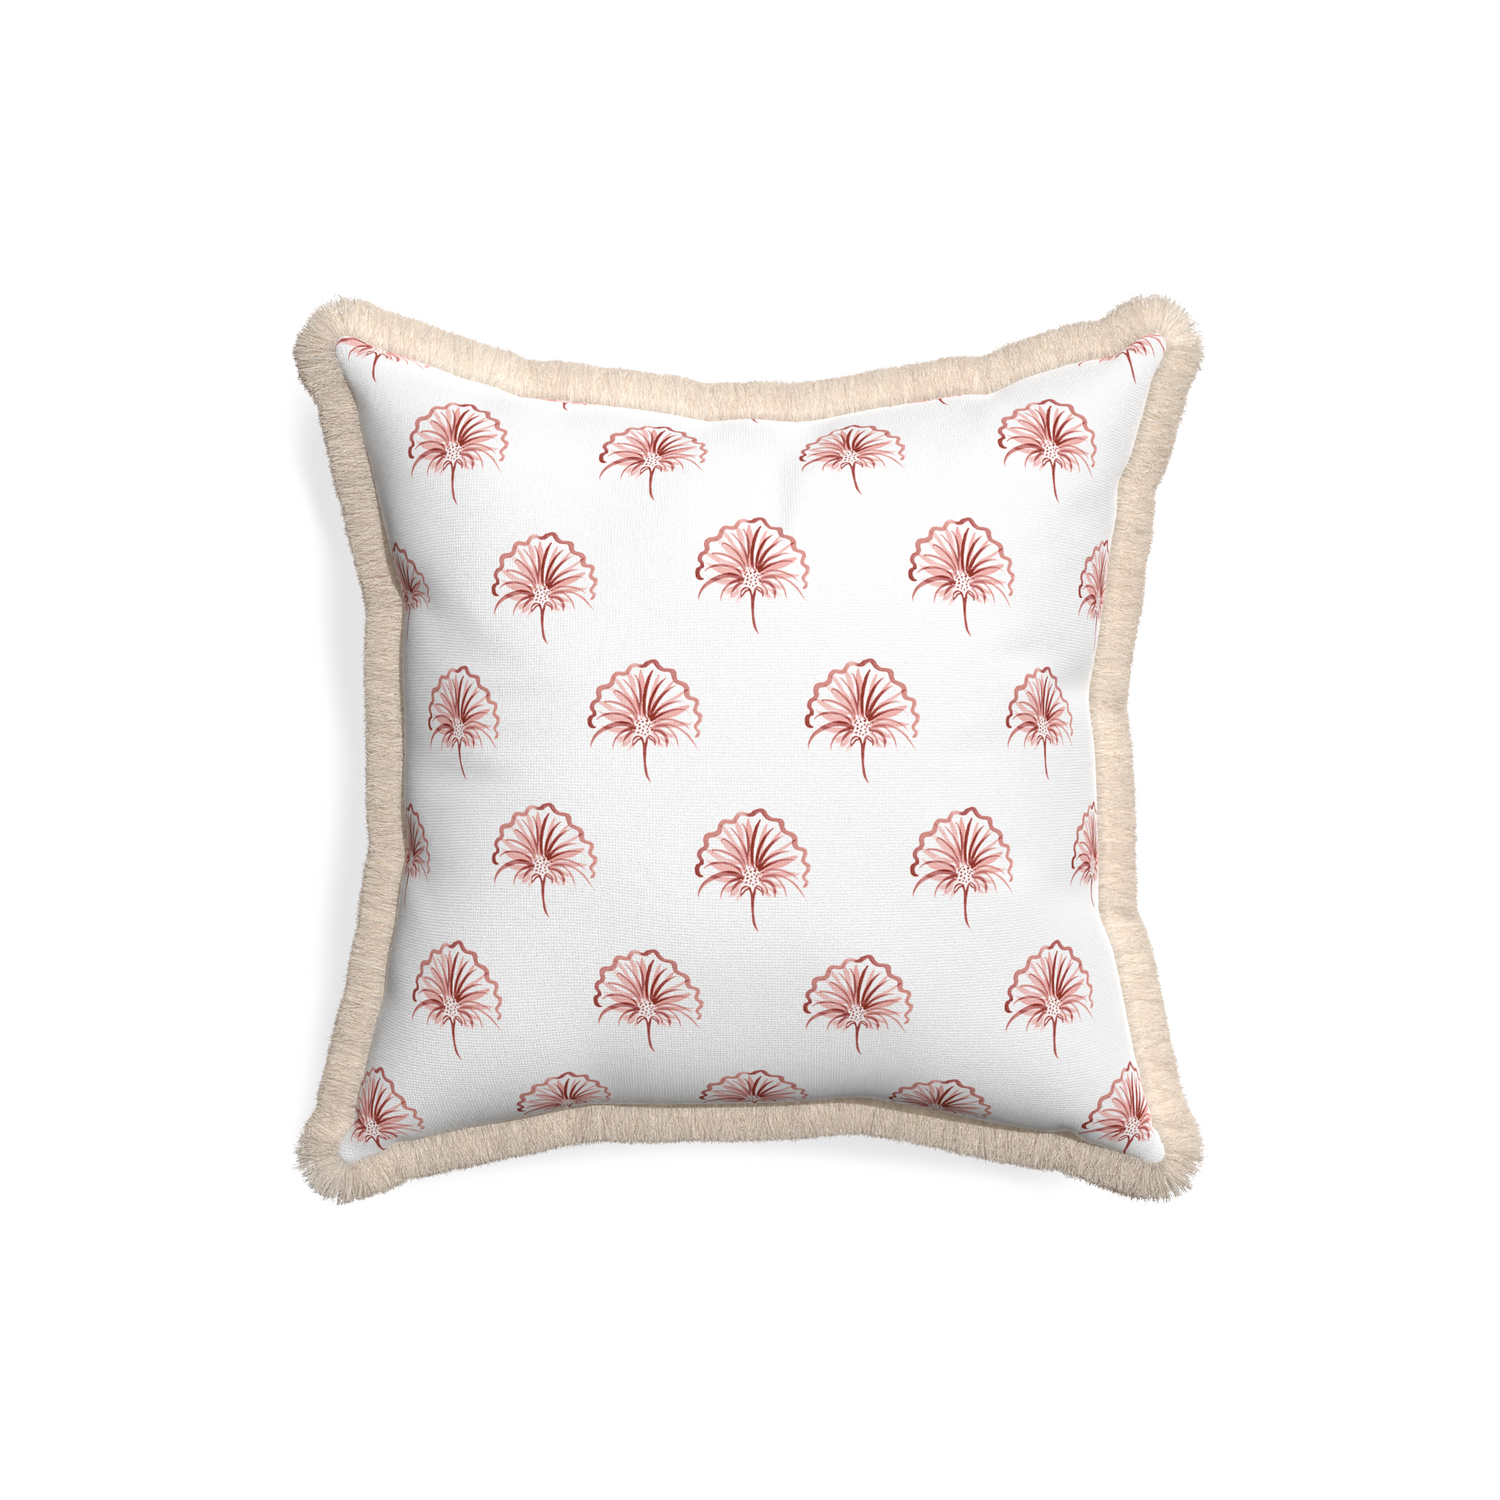 18-square penelope rose custom floral pinkpillow with cream fringe on white background